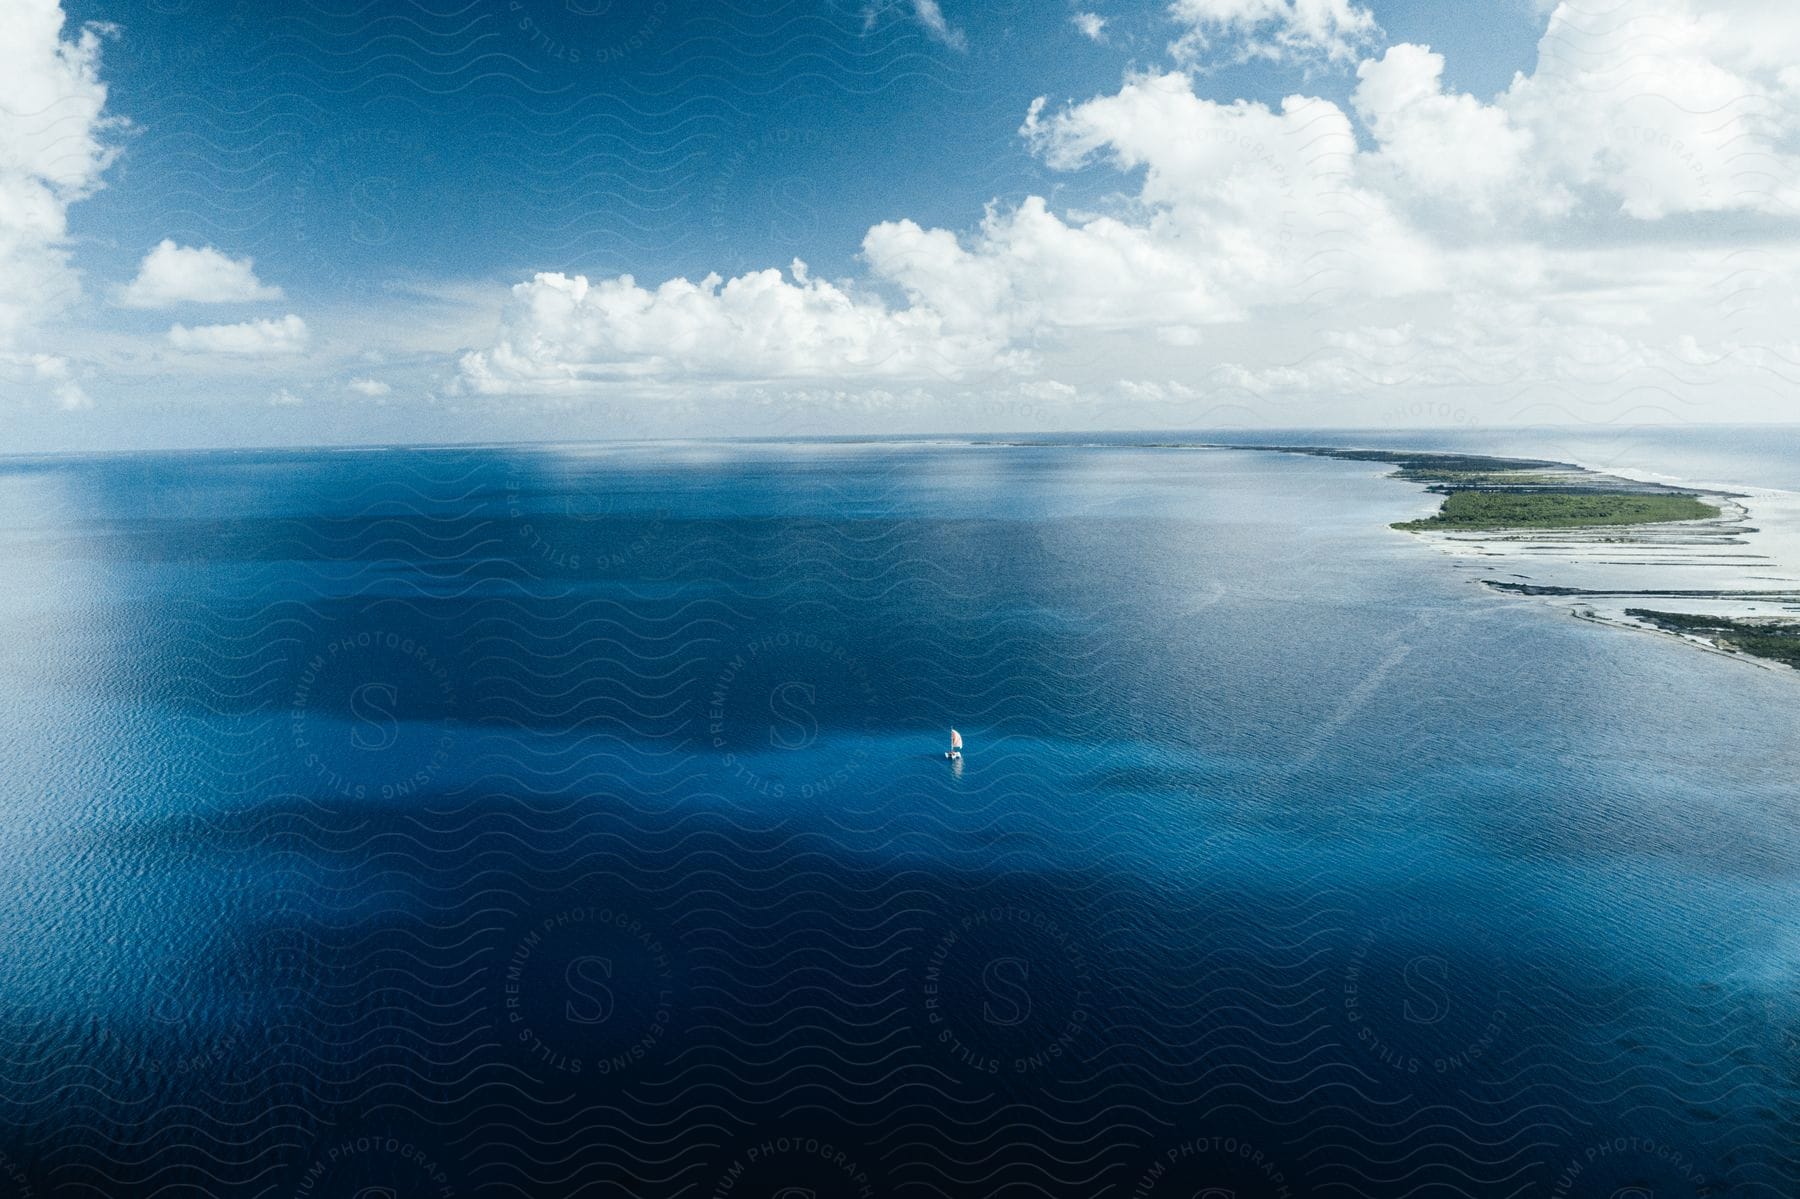 A boat drives on ocean water from an aerial perspective